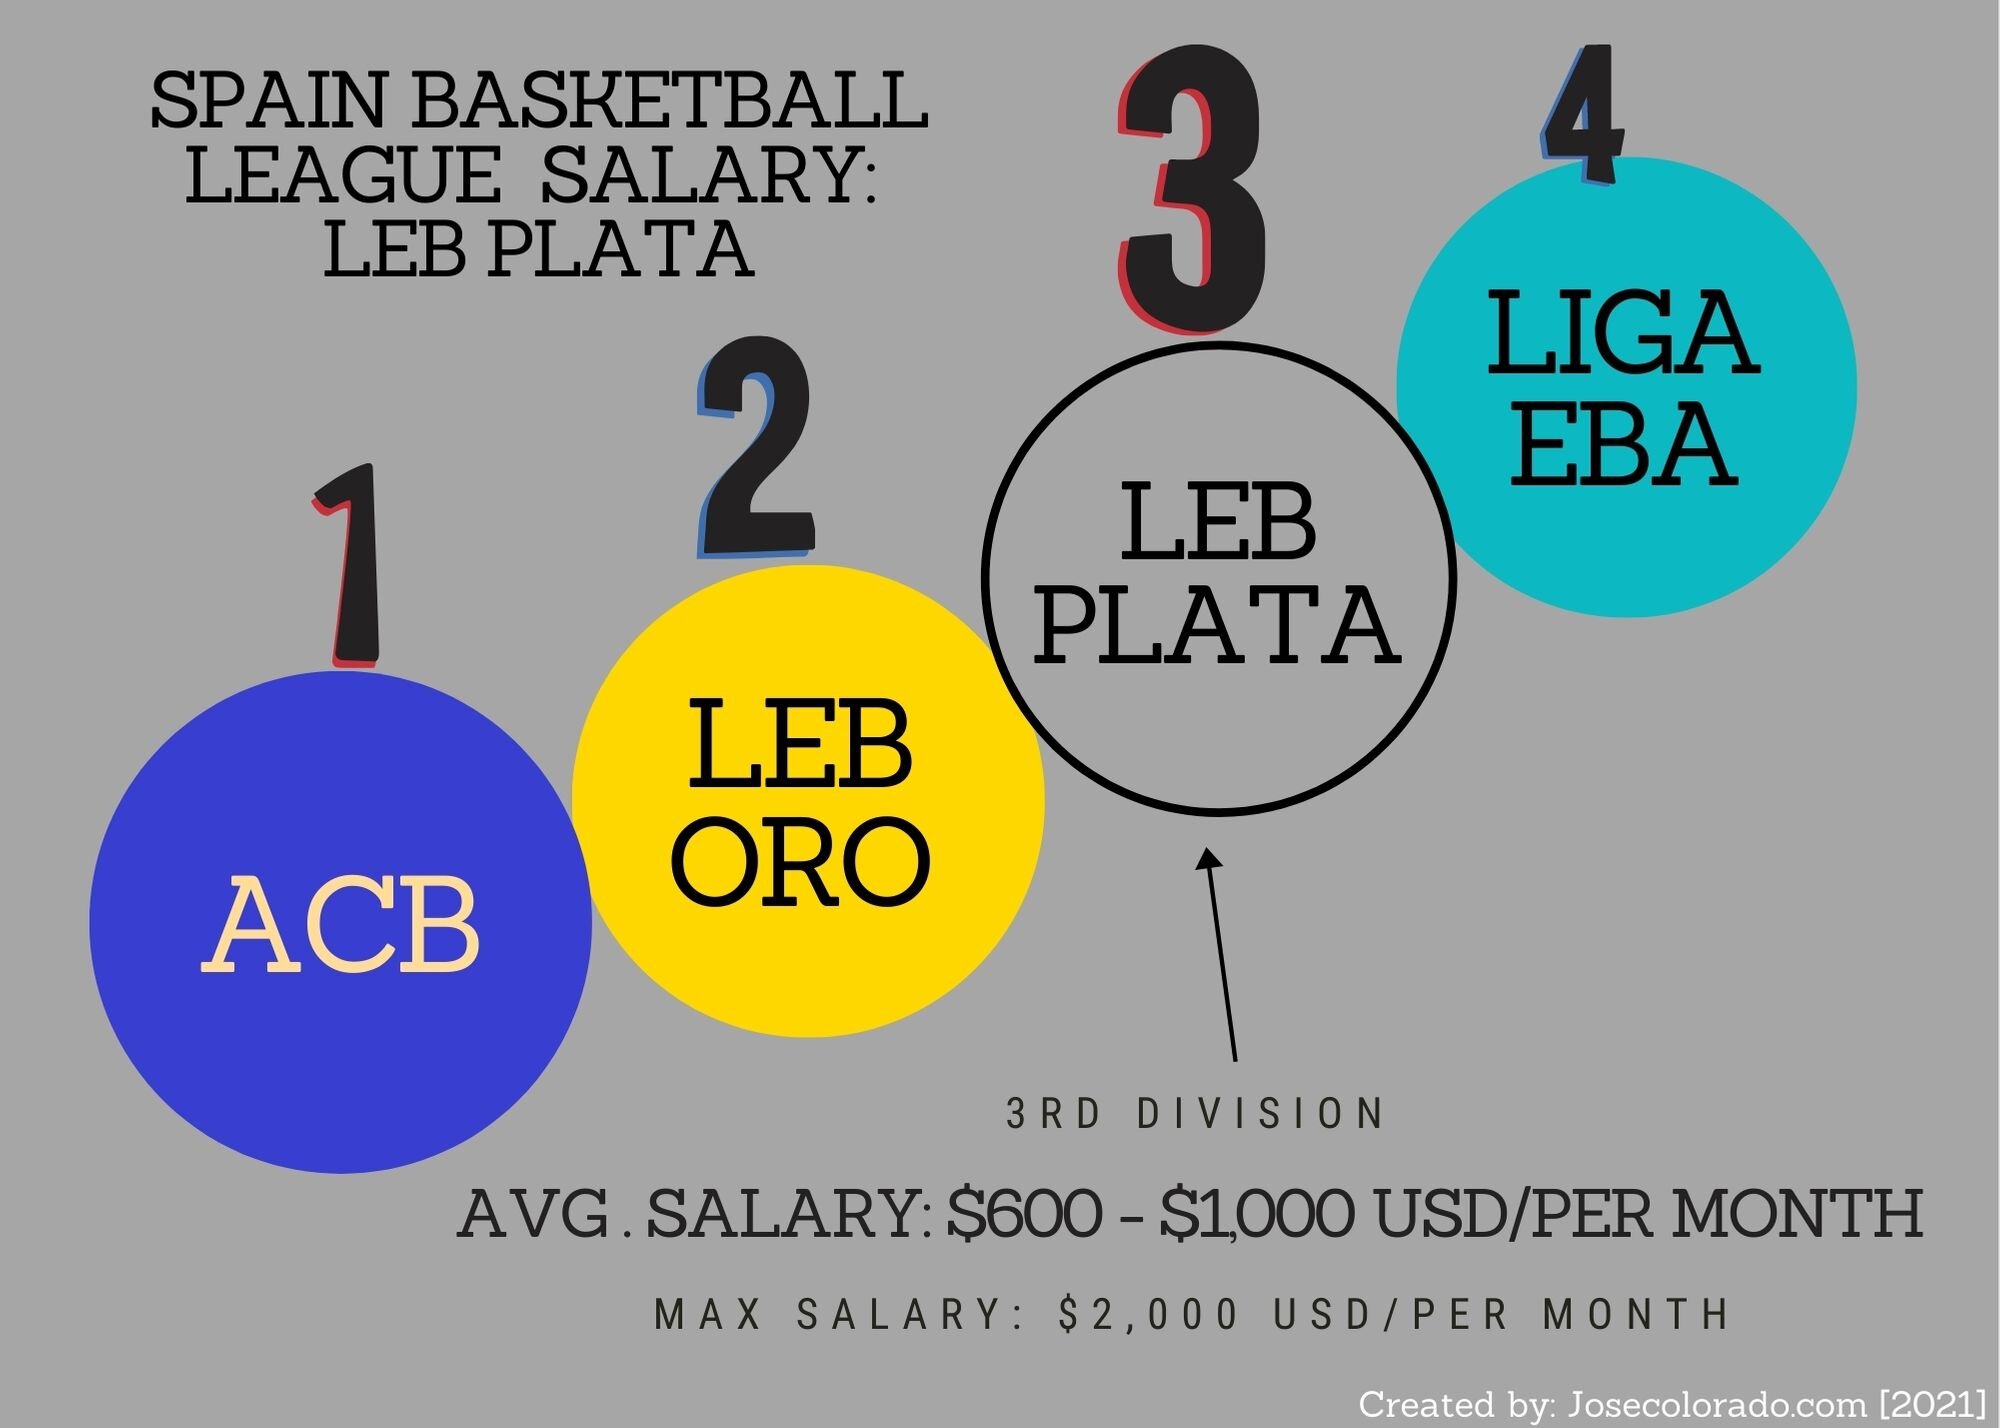 Overseas basketball players in Spain’s LEB Plata (3rd division) can expect to make $600 - $1,000 USD/per month on average.